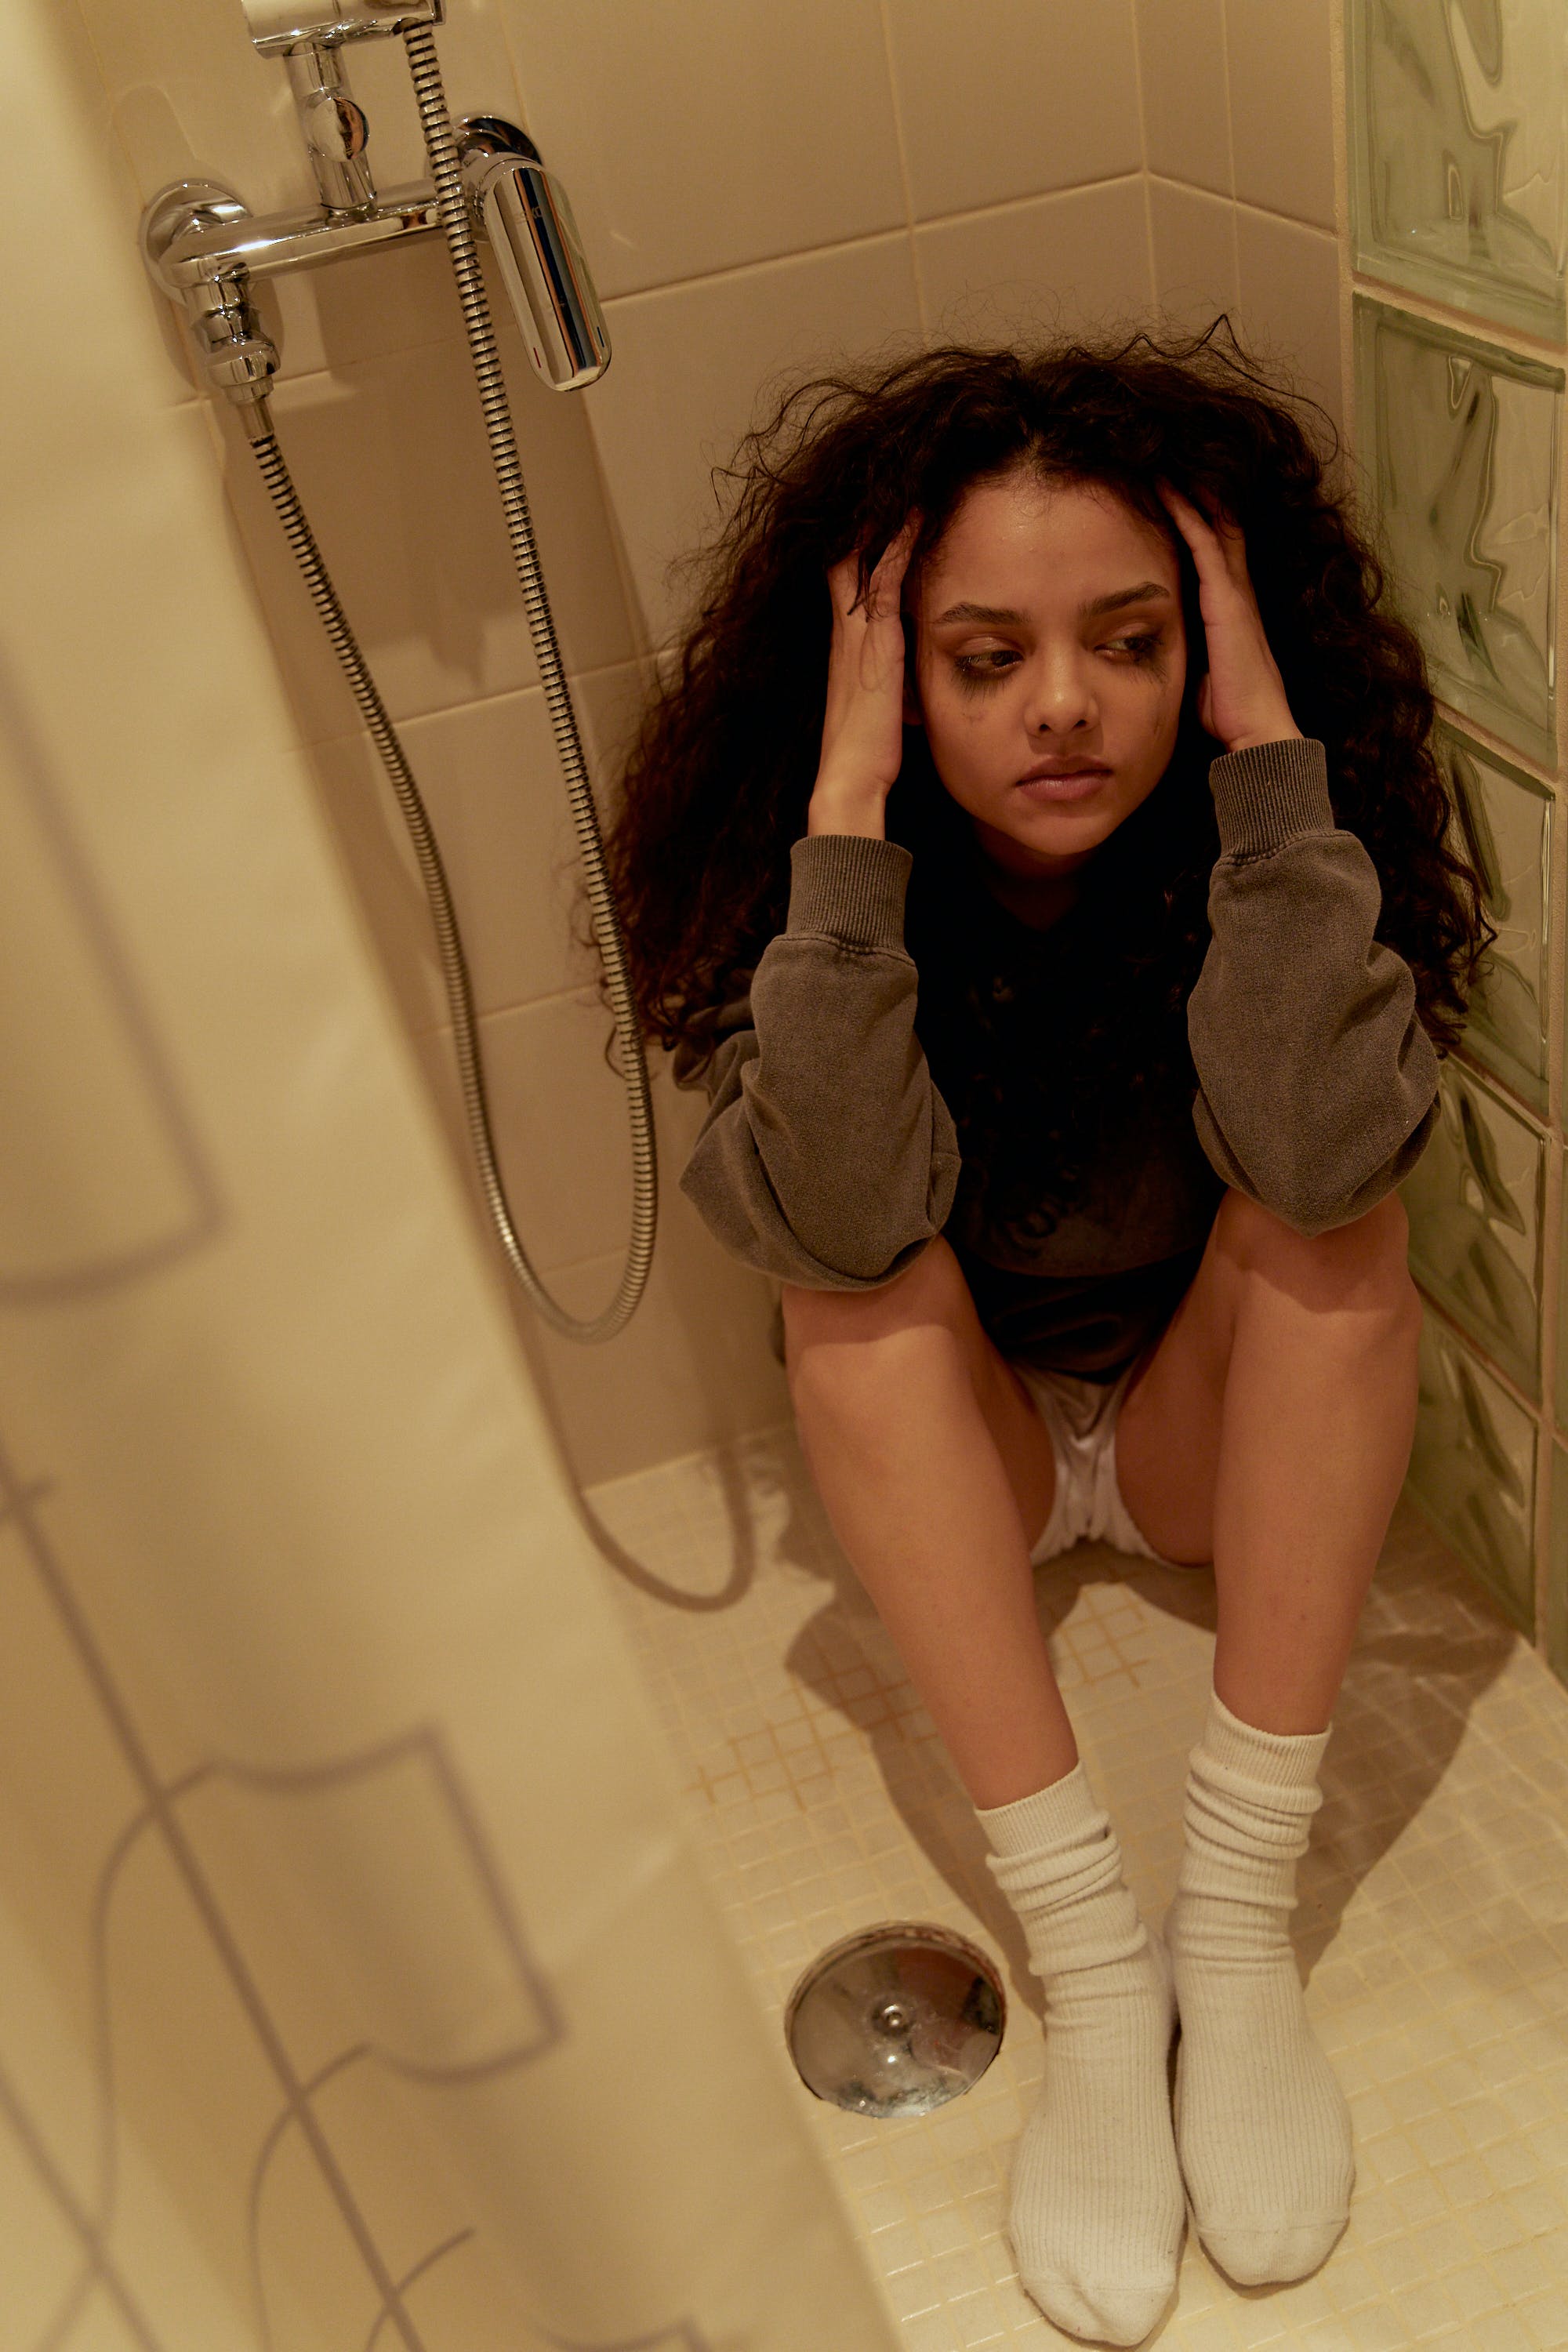 An upset young woman crying while sitting on a shower floor | Source: Pexels